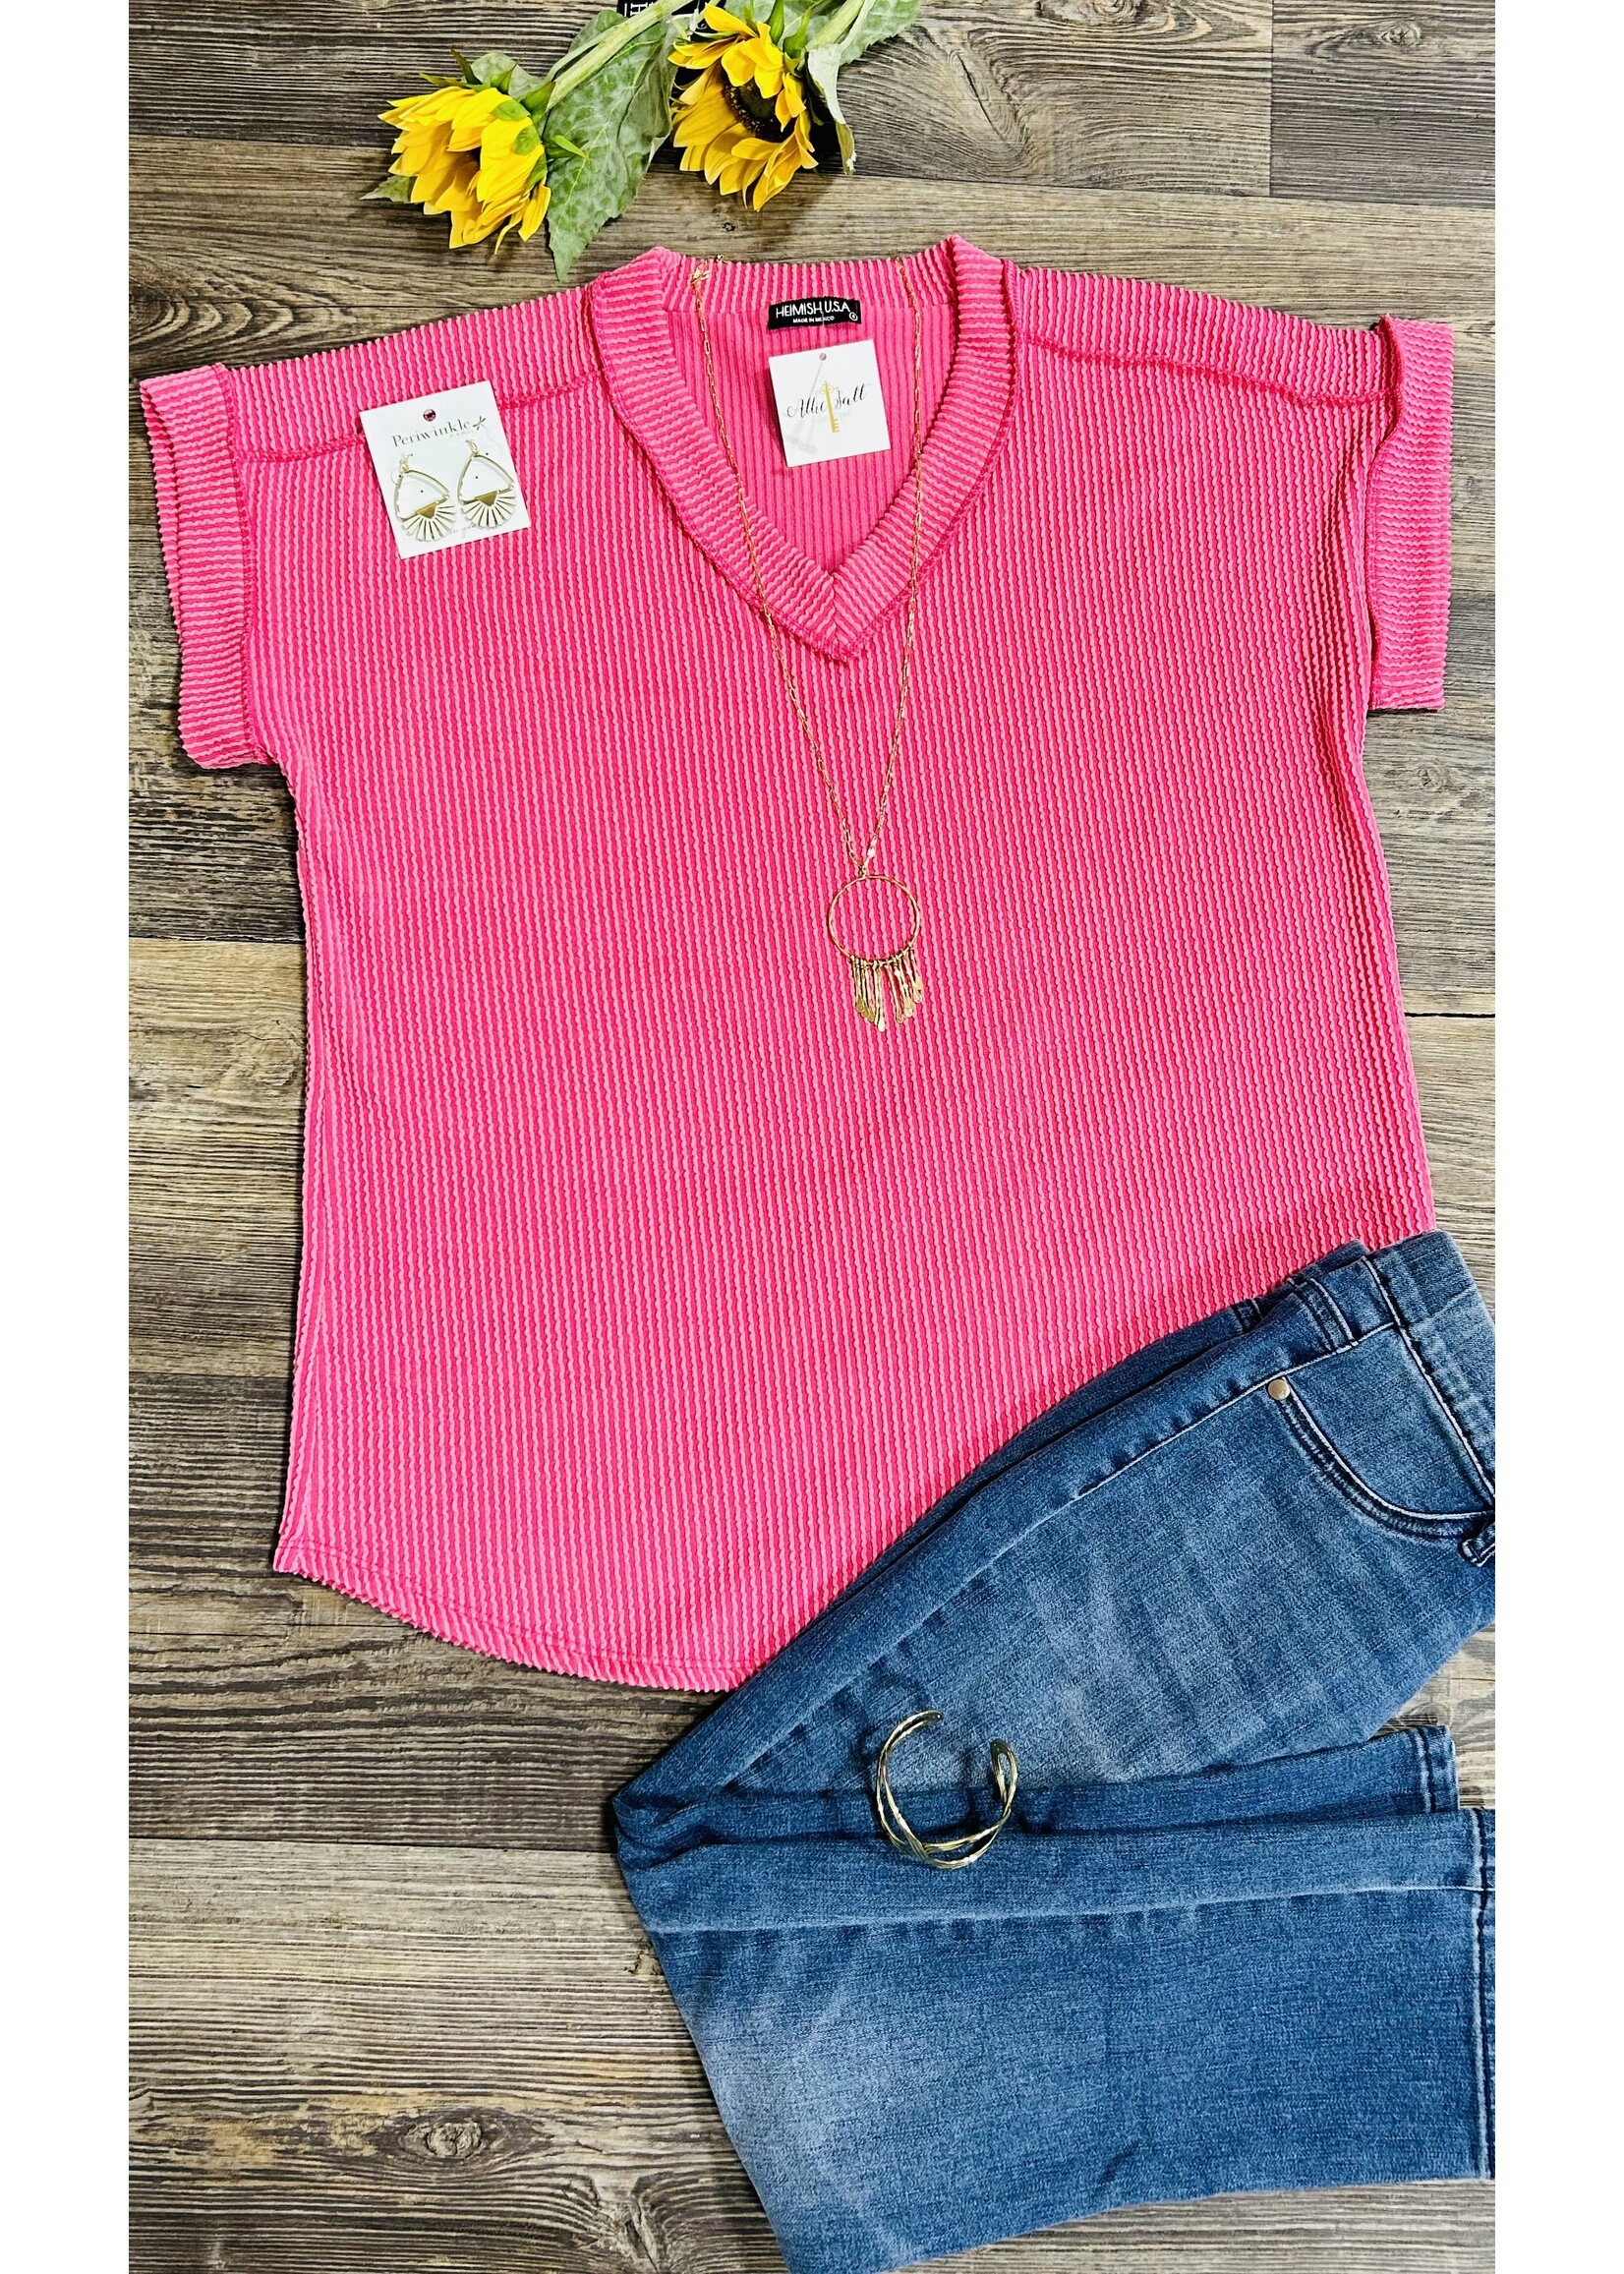 The Urban Ribbed Top in Hot Pink